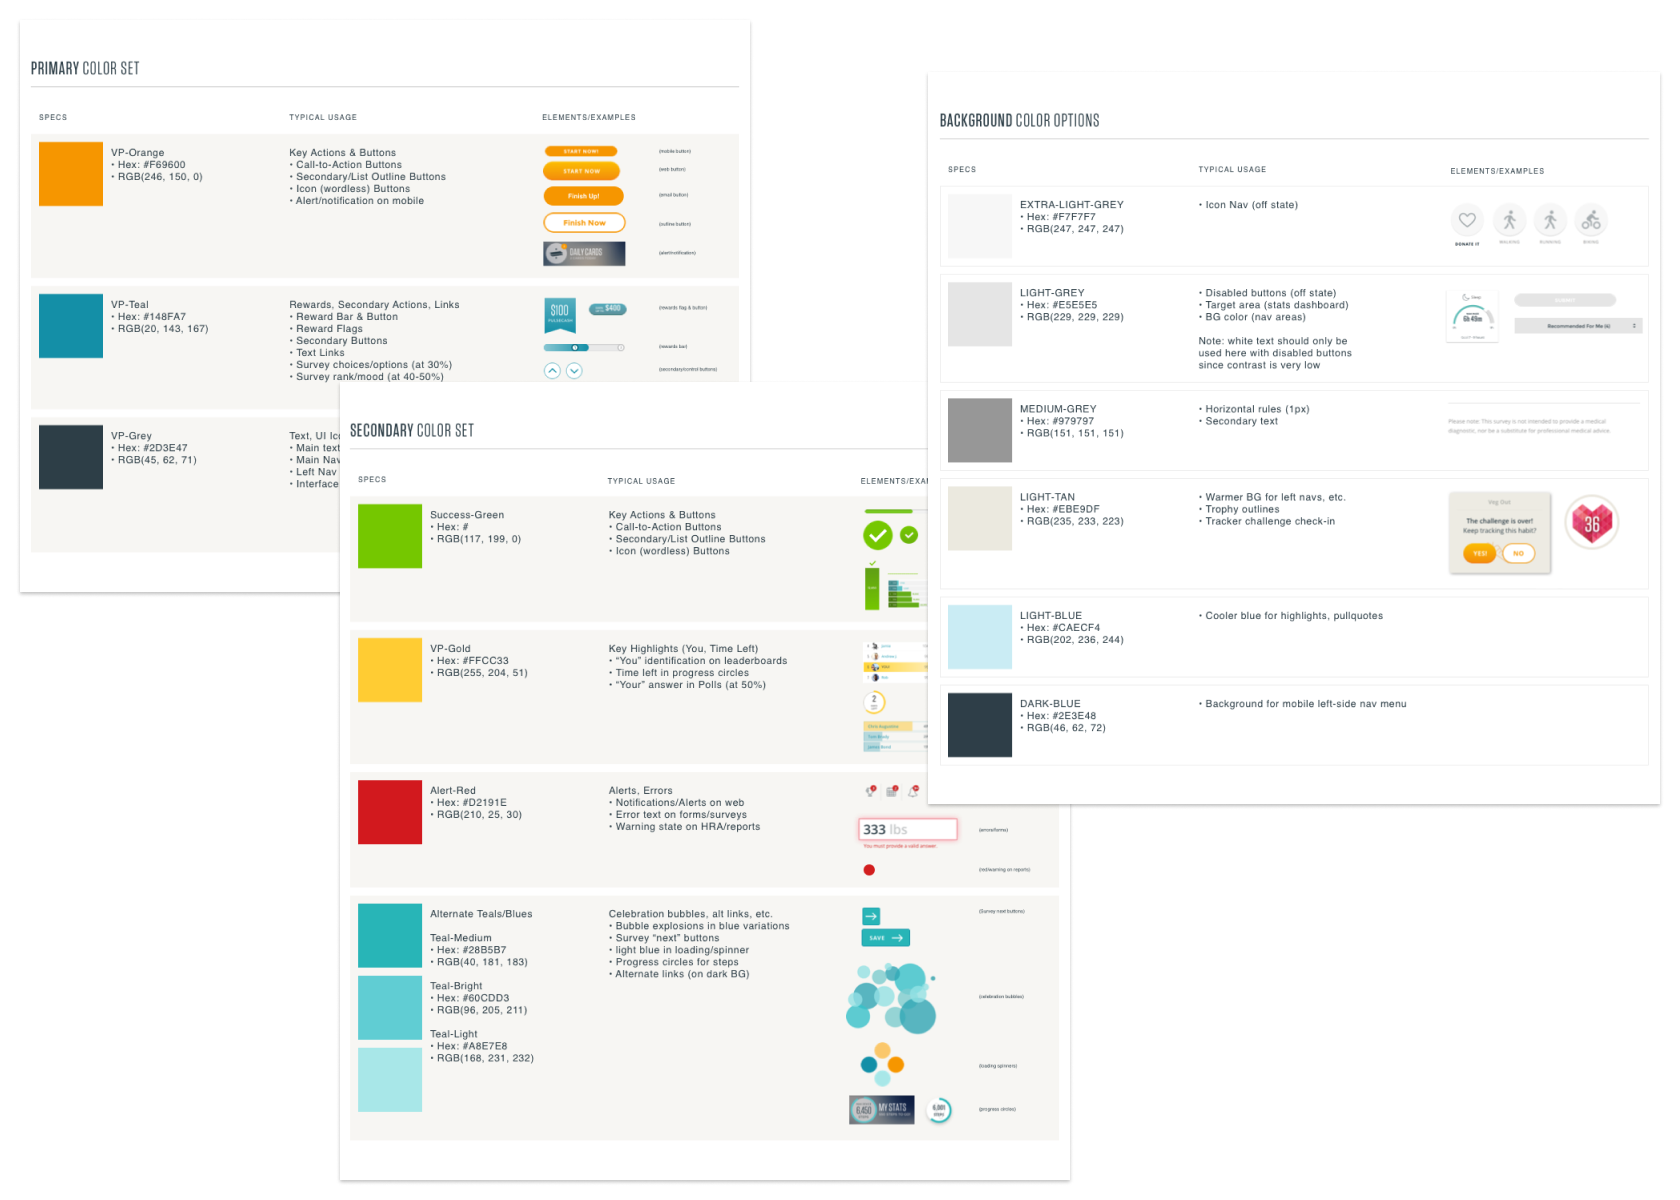 The original color system, resolved into sensible relationships and styles.